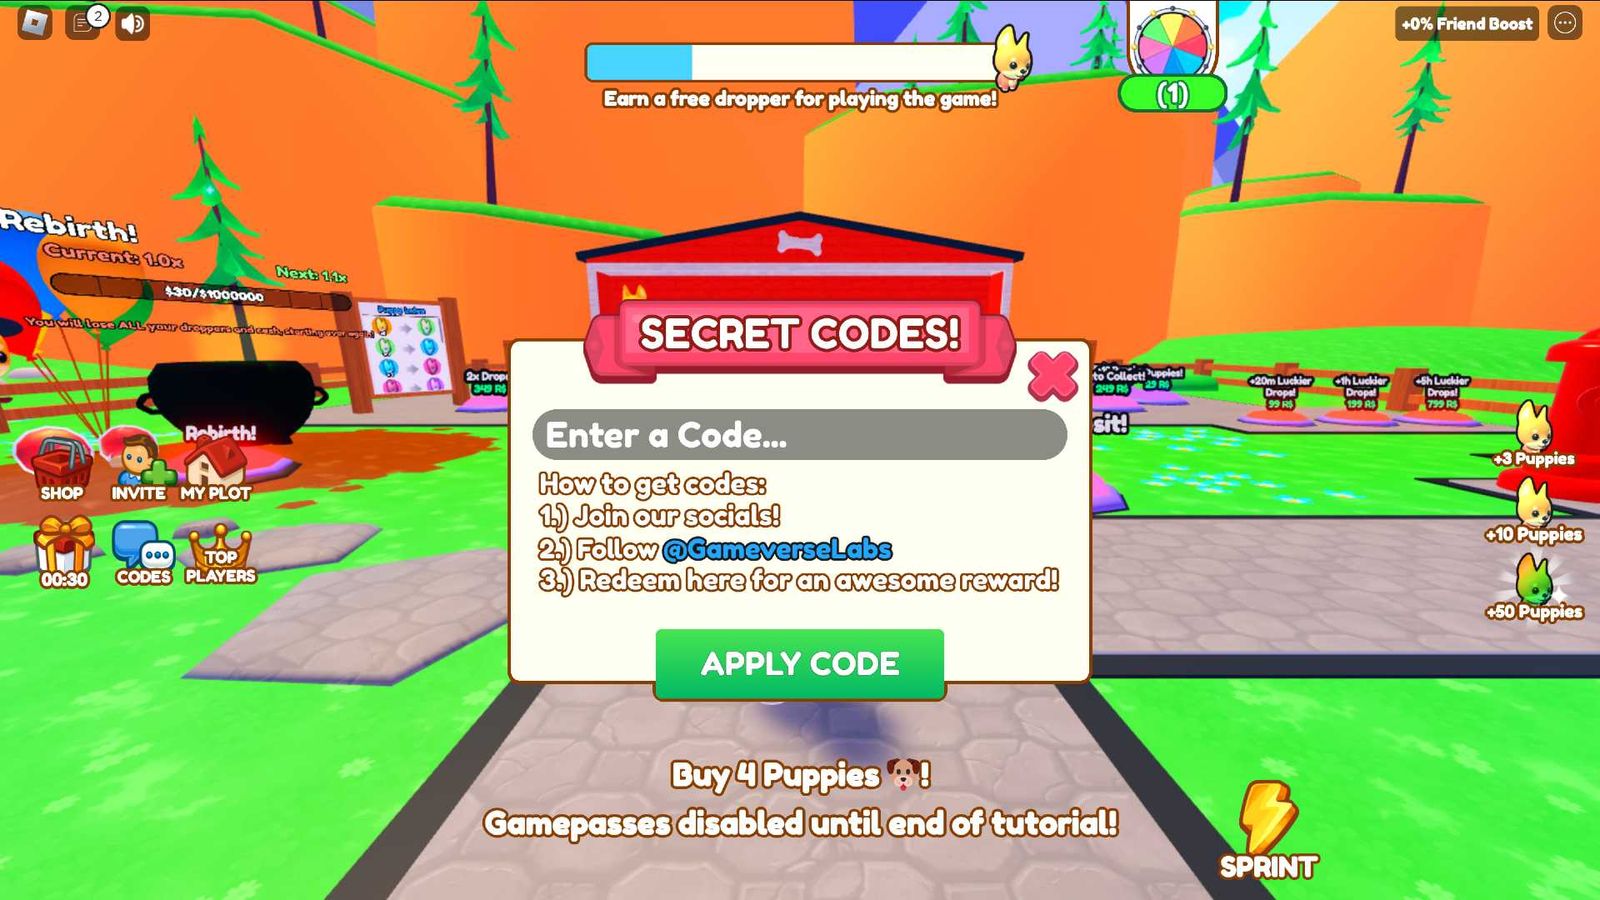 The code redemption page in Puppy Tycoon on Roblox.